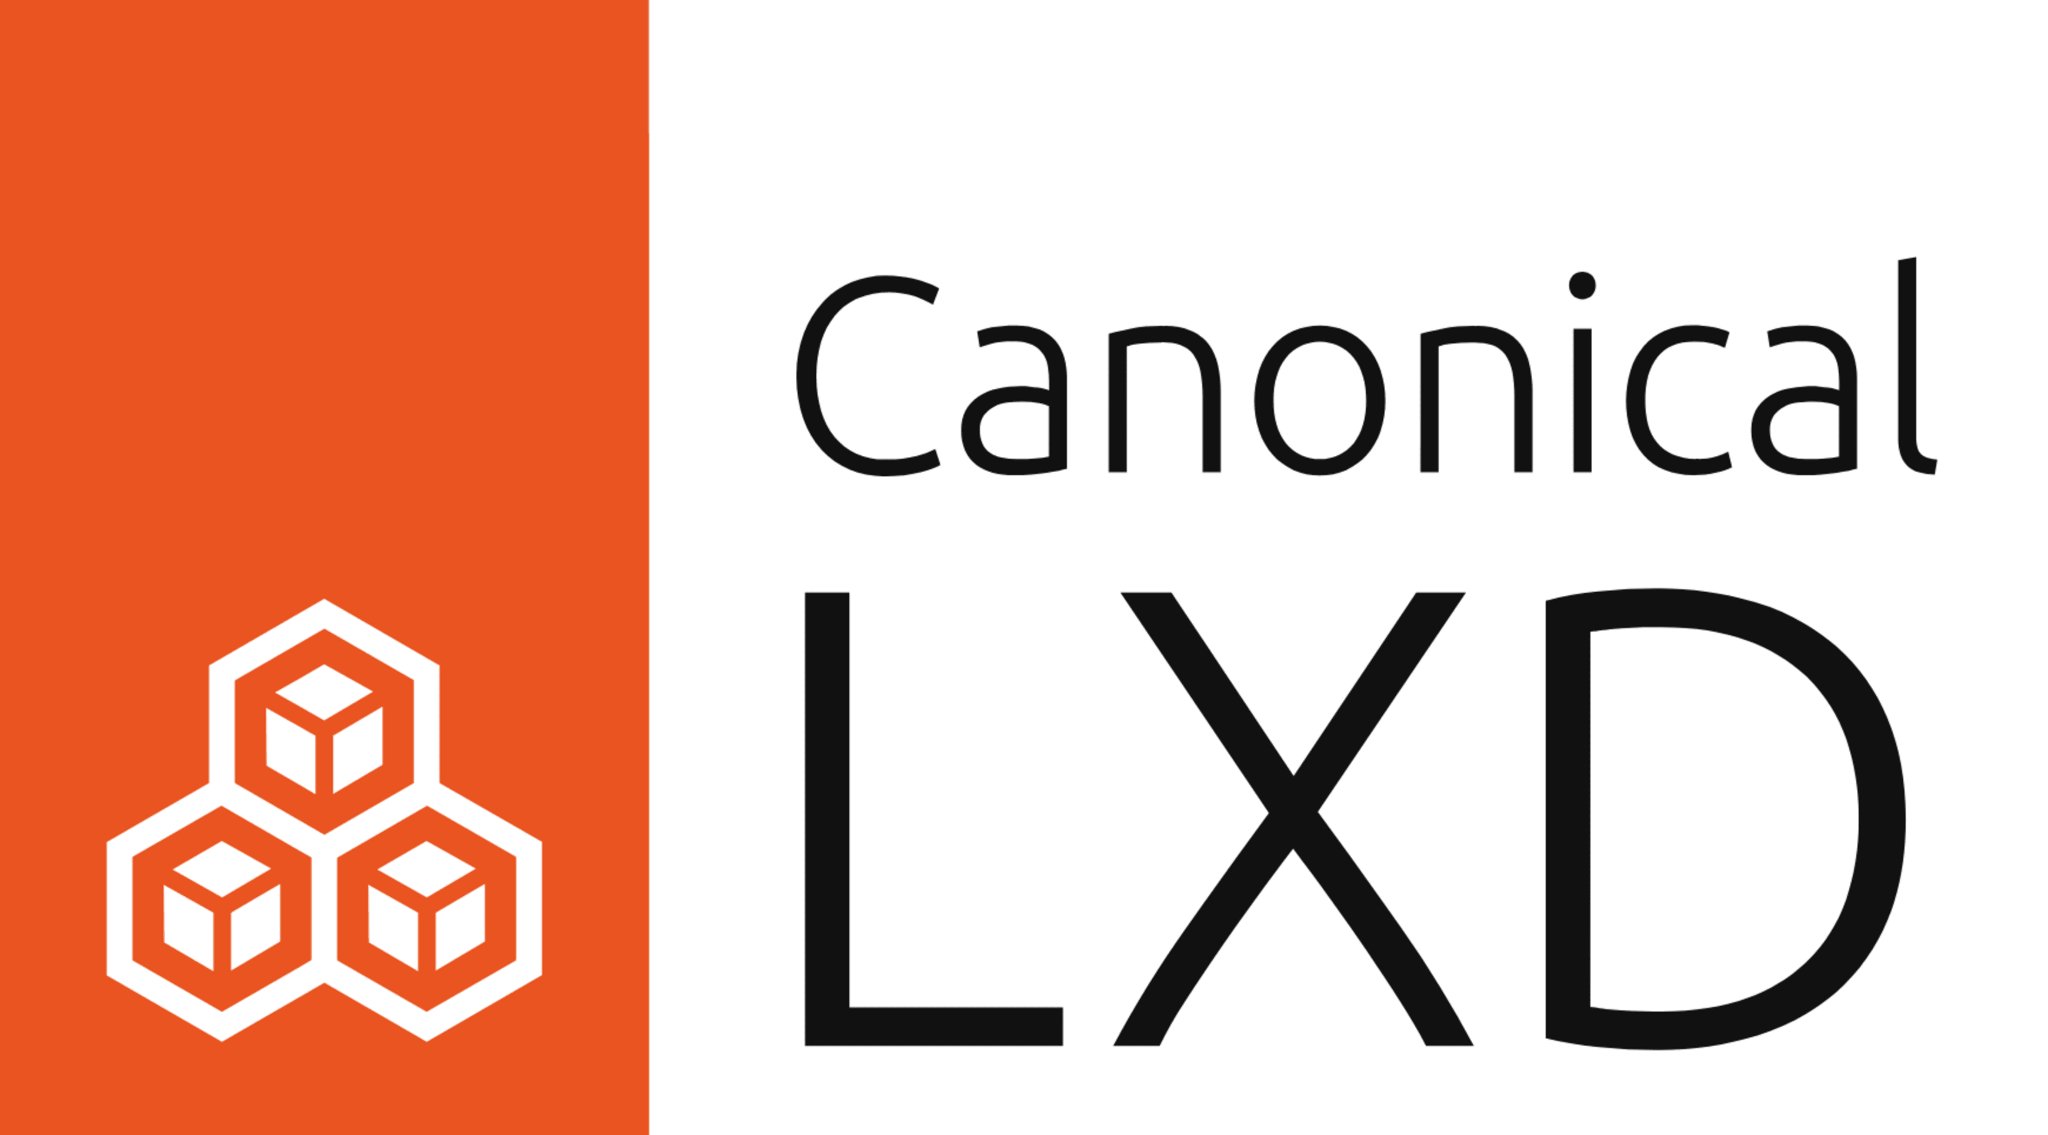 :canonical_lxd: